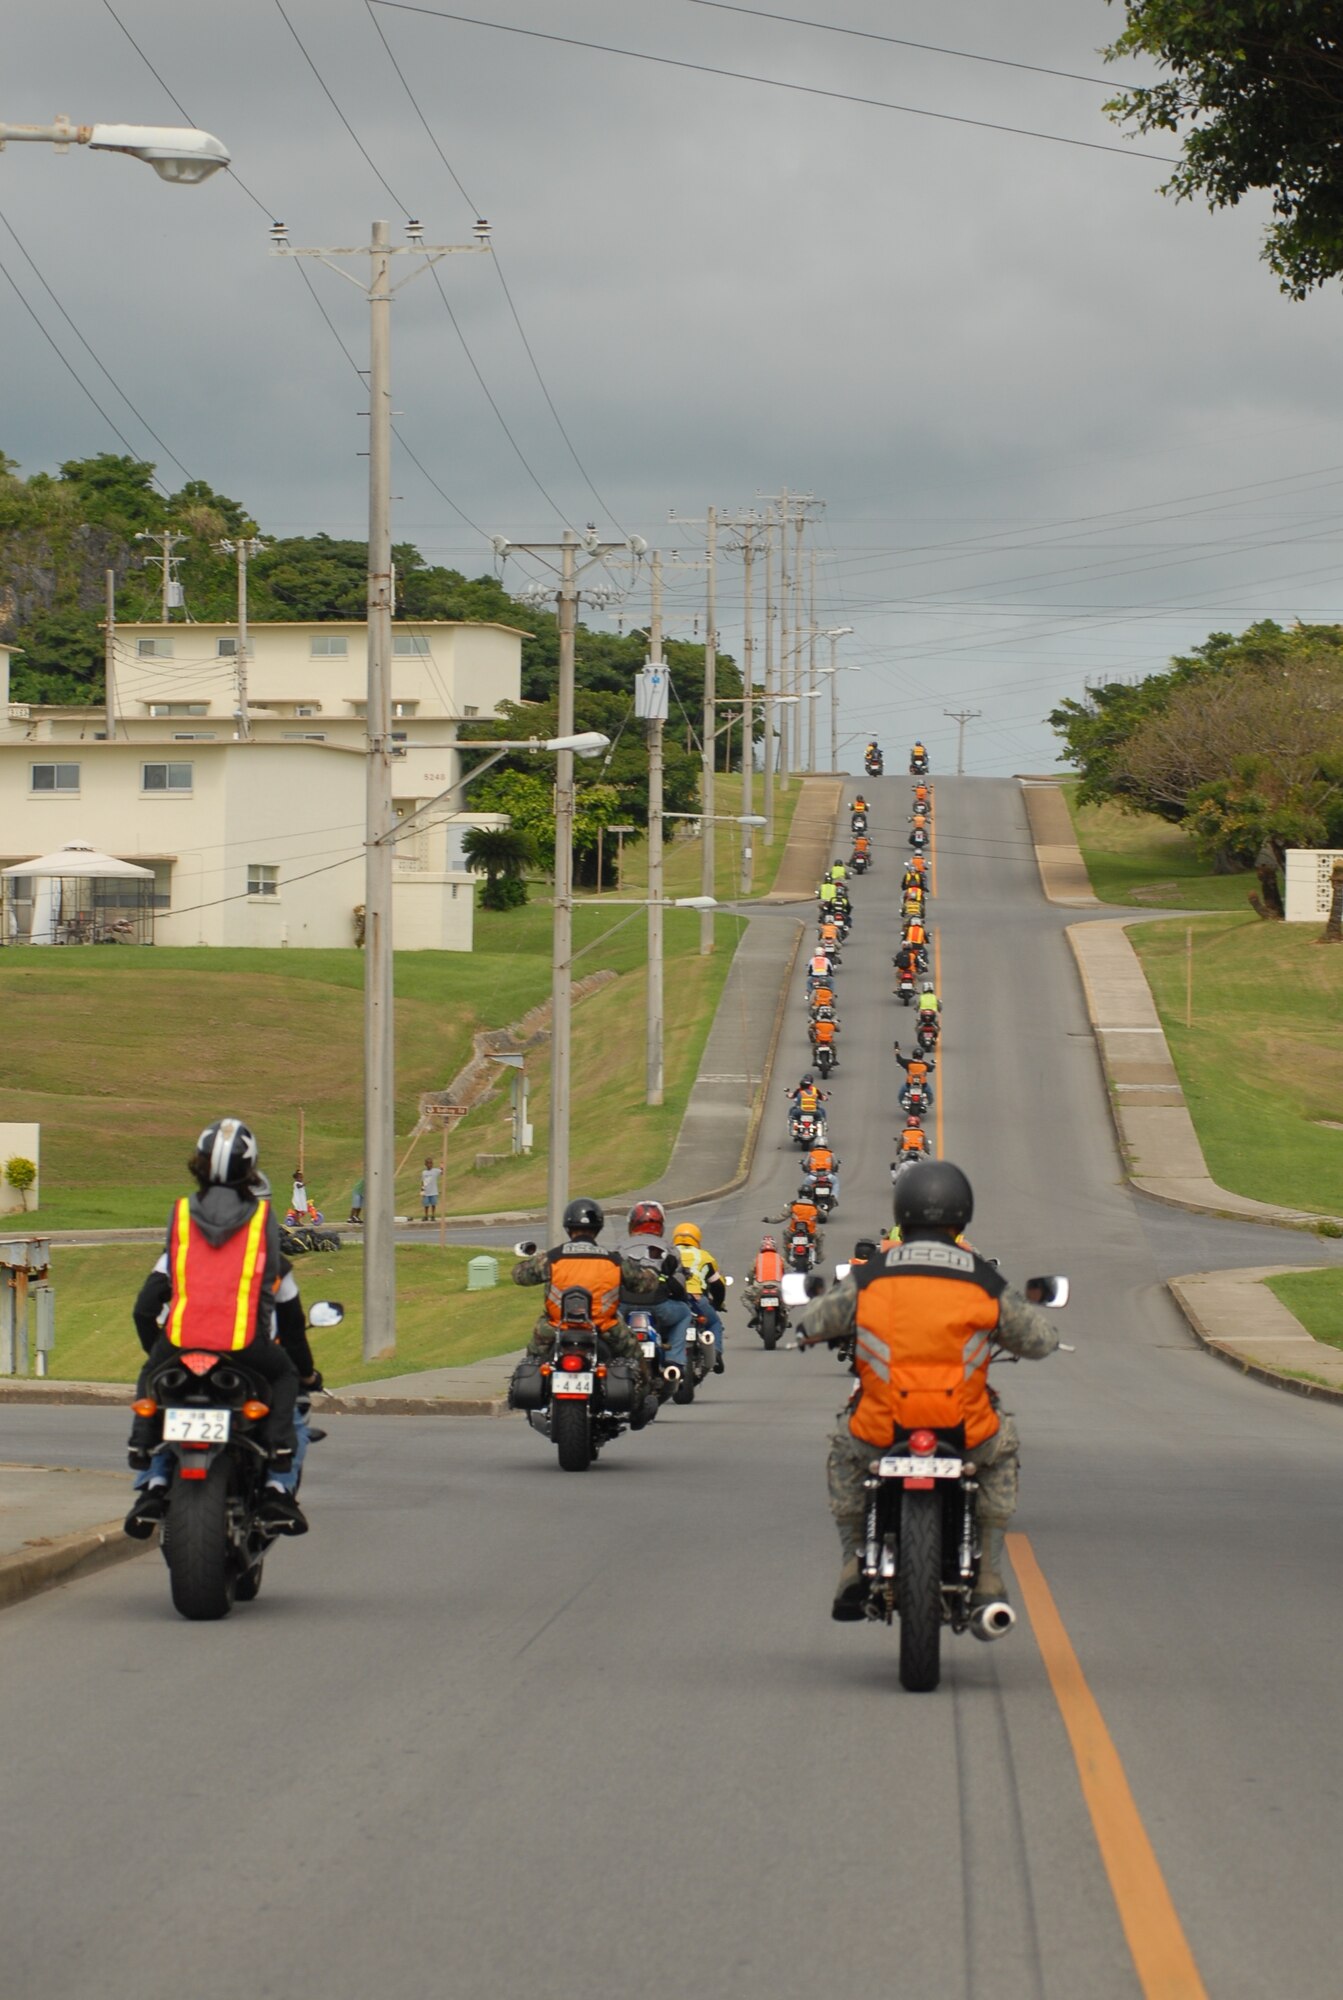 Military members and dependents participate in a safety awareness ride July 25 as part of Motorcycle Safety Week. About 80 riders took part in the ride following a motorcycle rider all-call which emphasized rider safety. (U.S. Air Force photo/Tech. Sgt. Rey Ramon)